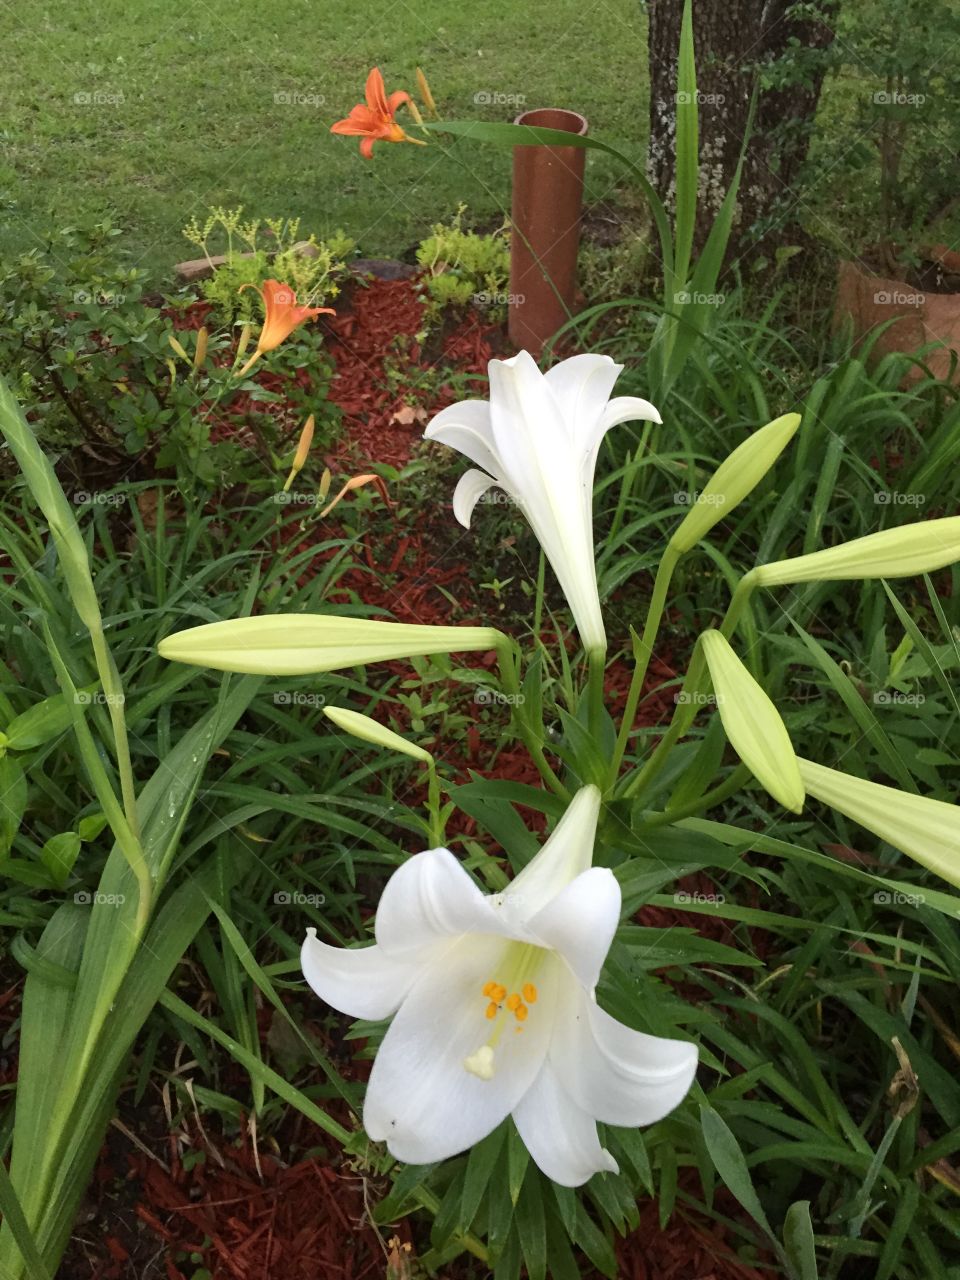 An Raster lily blooming in my spring garden.